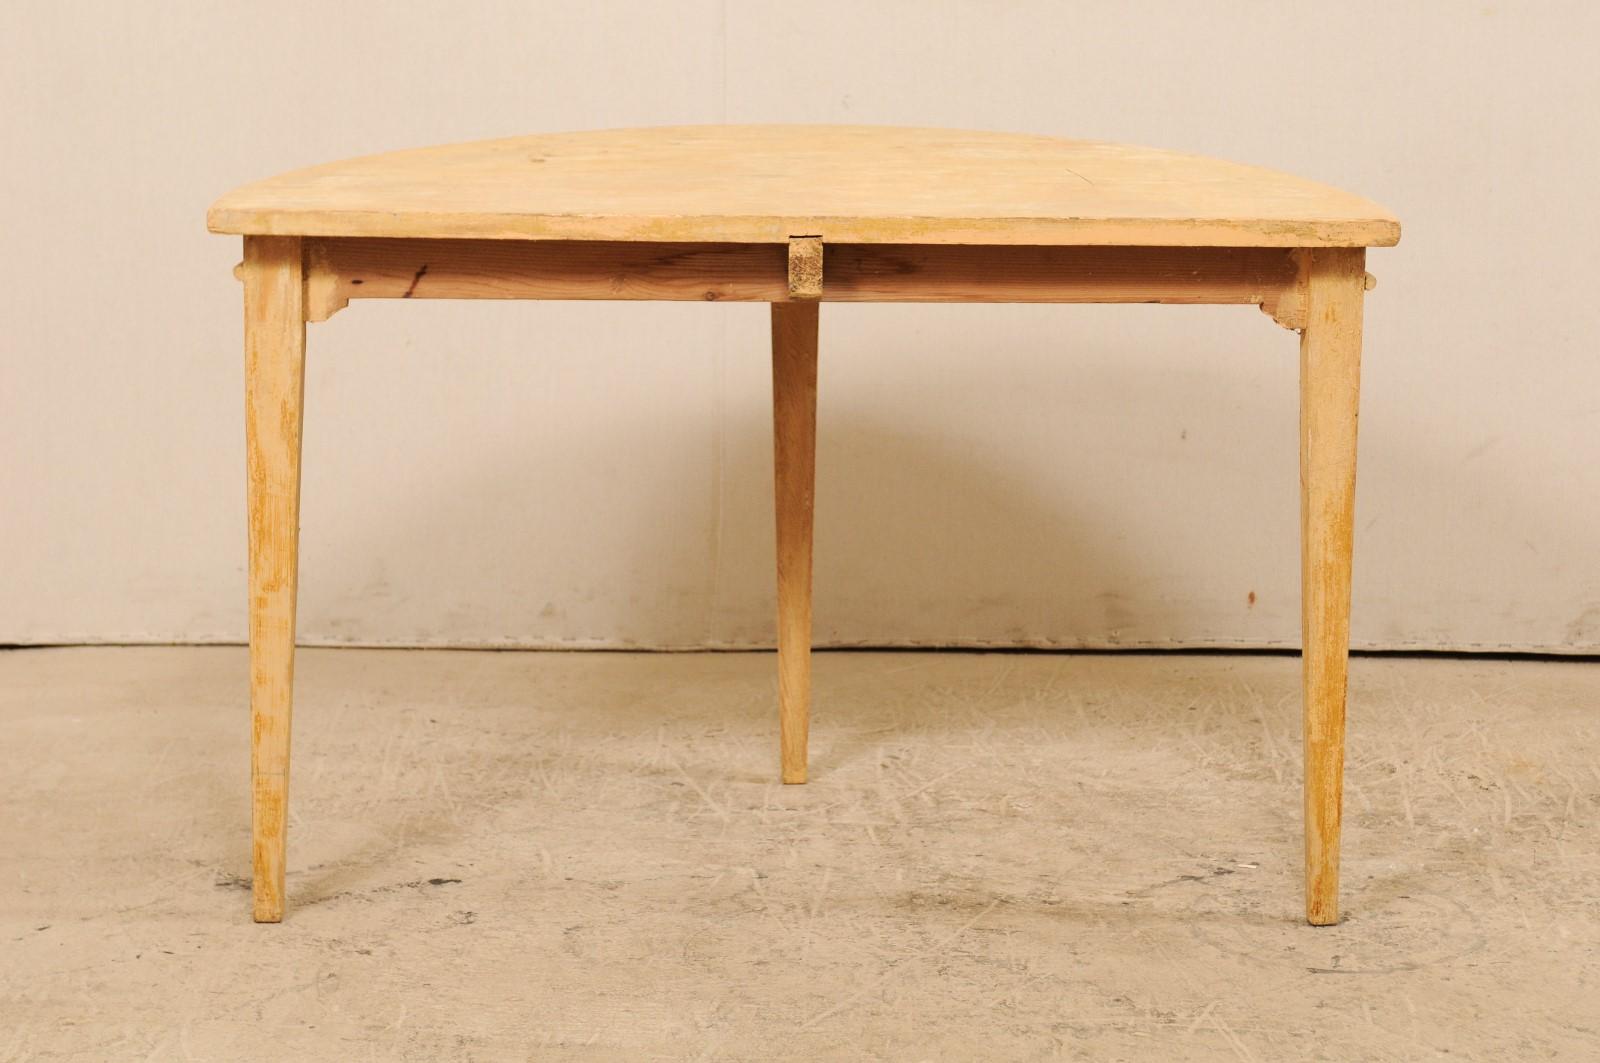 Single Swedish Demilune Light Wood Table from the 19th Century 6